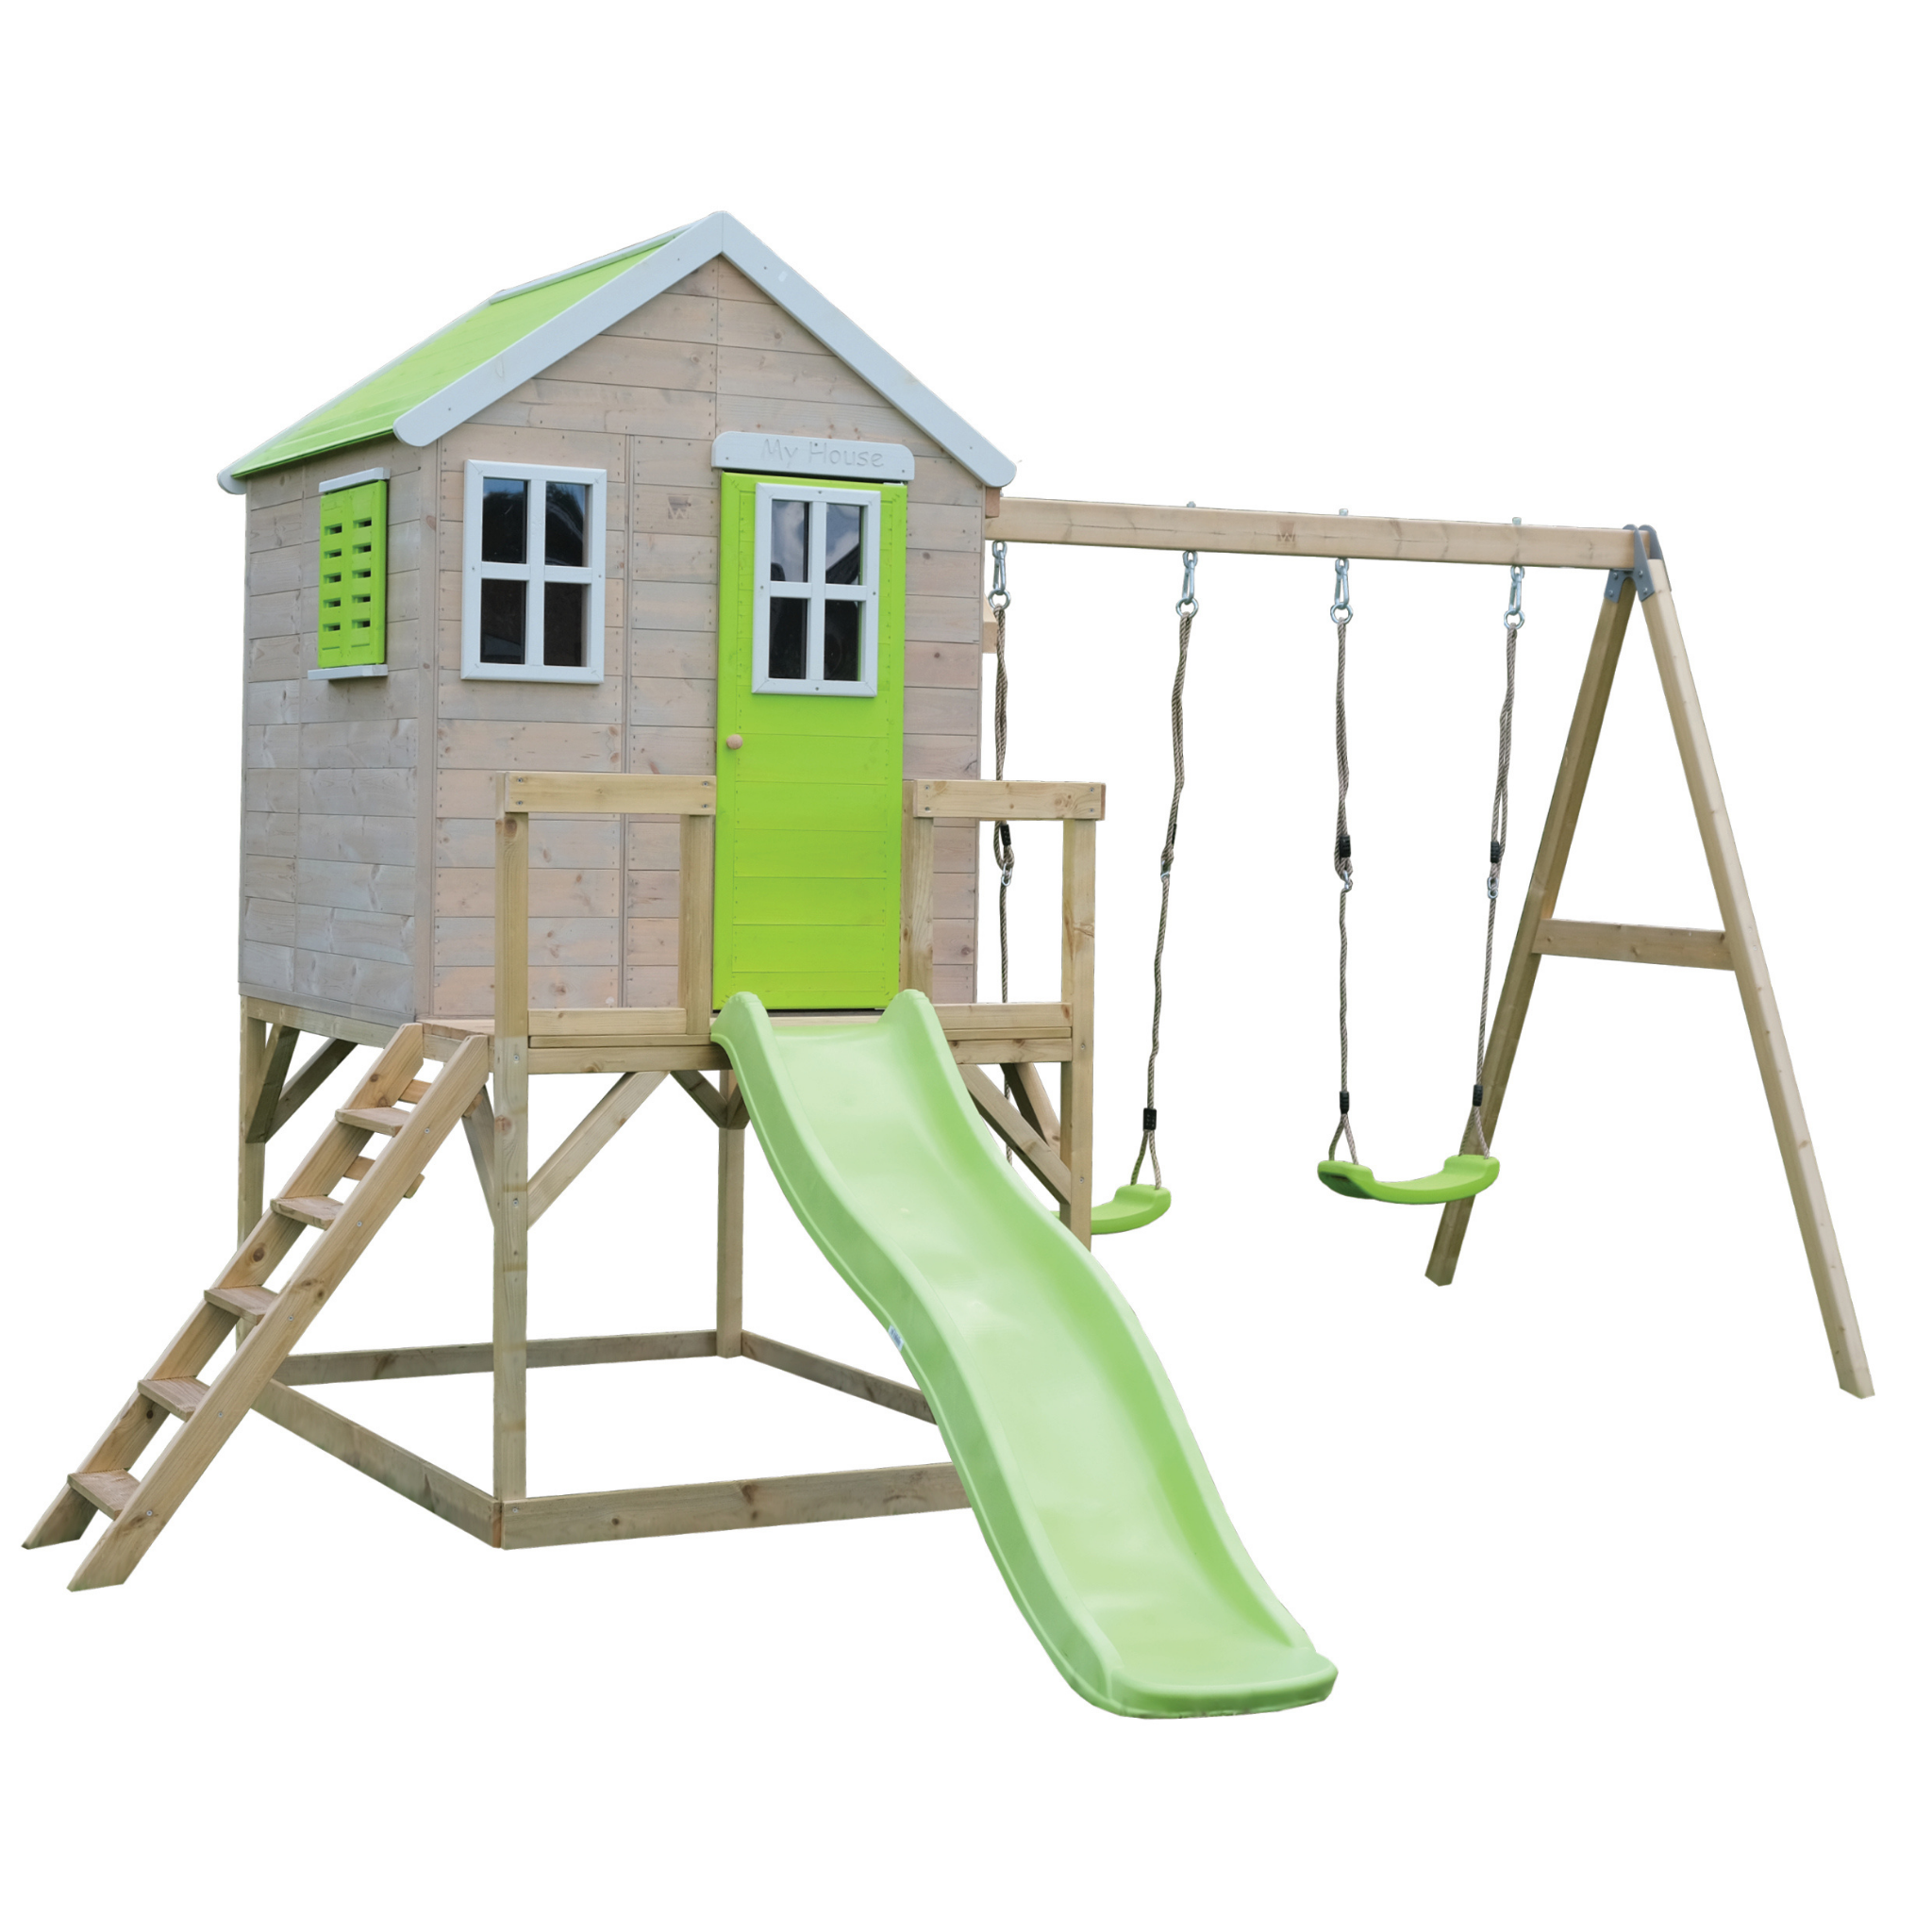 M28 My Lodge with Platform, Slide and Double Swing